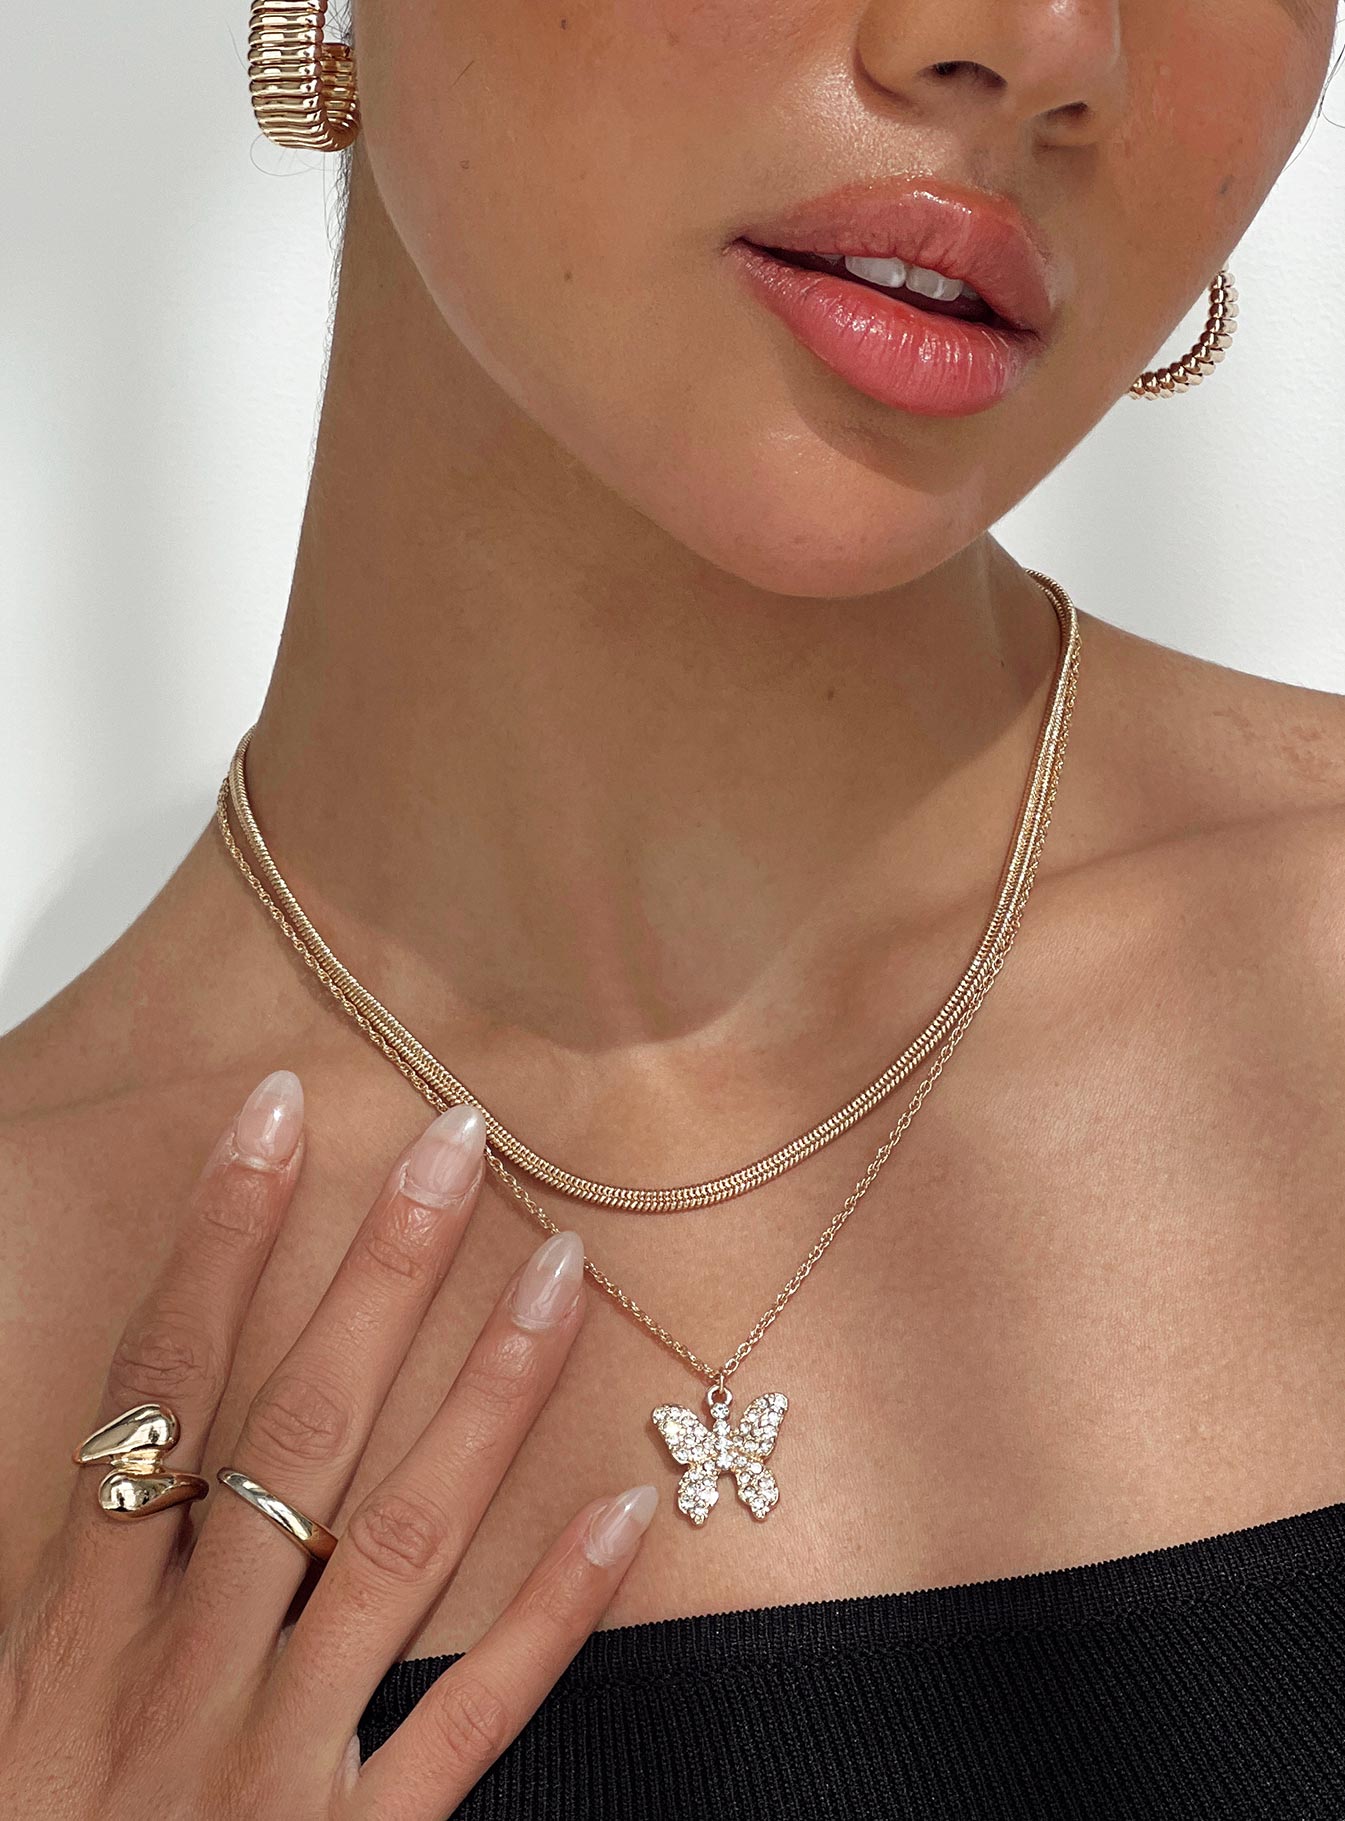 Silver Plated Cross on Chain With Large Diamante Beads #ML652 R225.00 |  Dimensions: Necklace is 690mm, Pendant is 55mm by 38mm - Molly's Loft  Online Shop